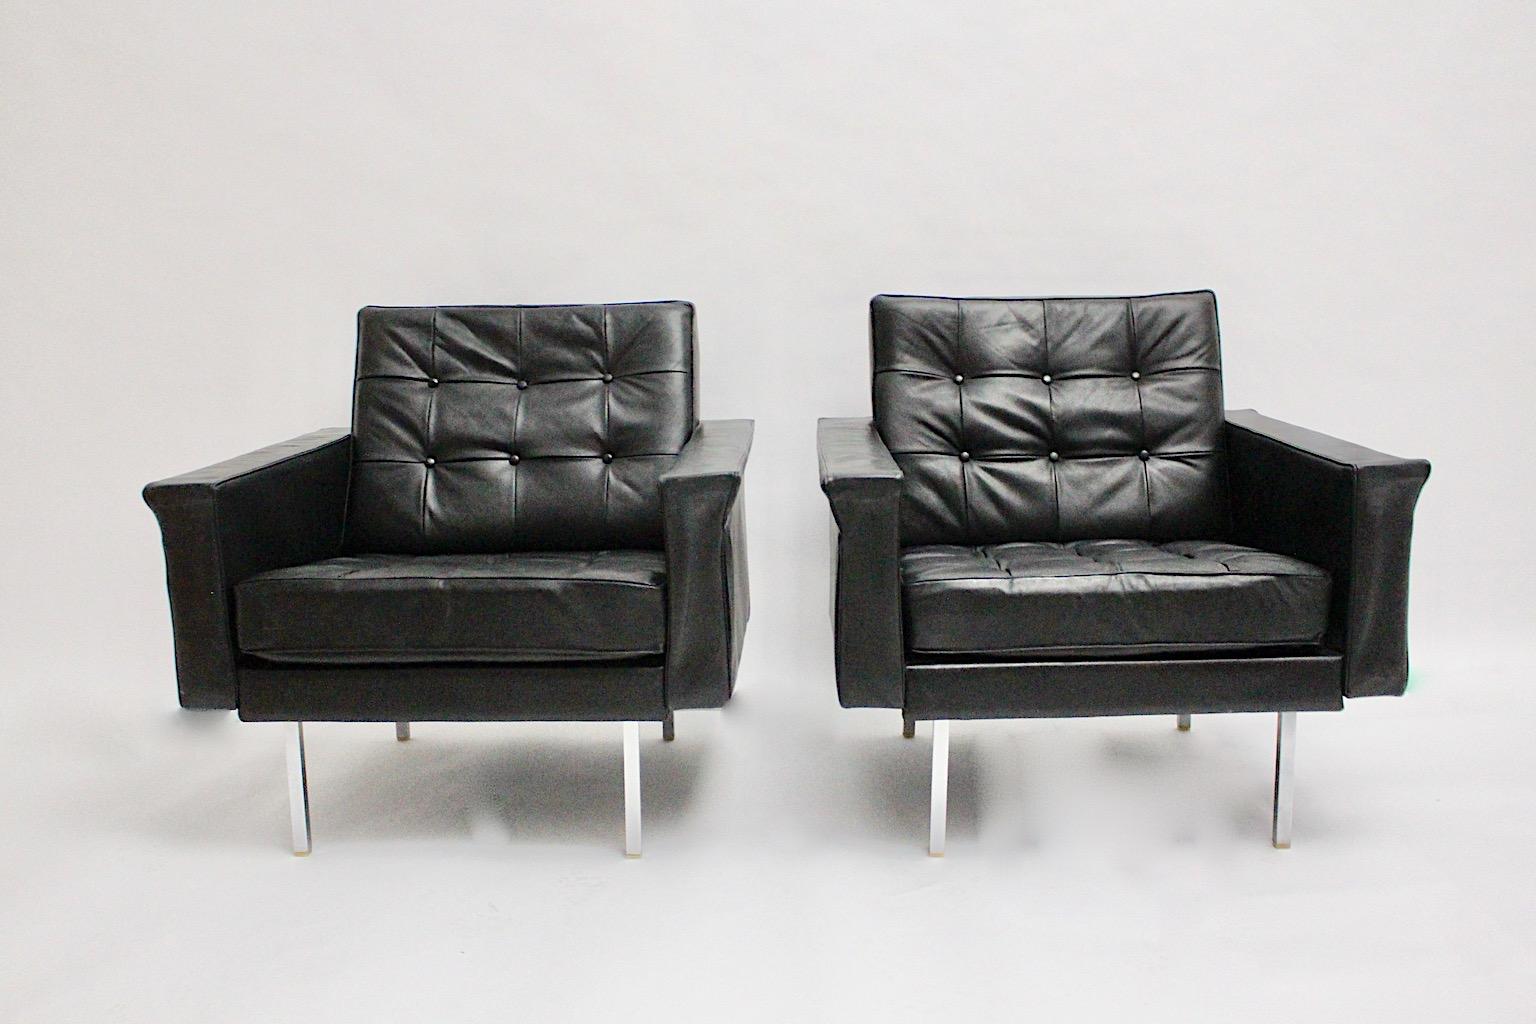 Mid-Century Modern pair of vintage freestanding lounge chairs or club chairs cubus like from stitched leather in black color by Johannes Spalt, 1960s Vienna. 
A pair of fabulous club chairs from black leather with chromed metal legs in rectangular